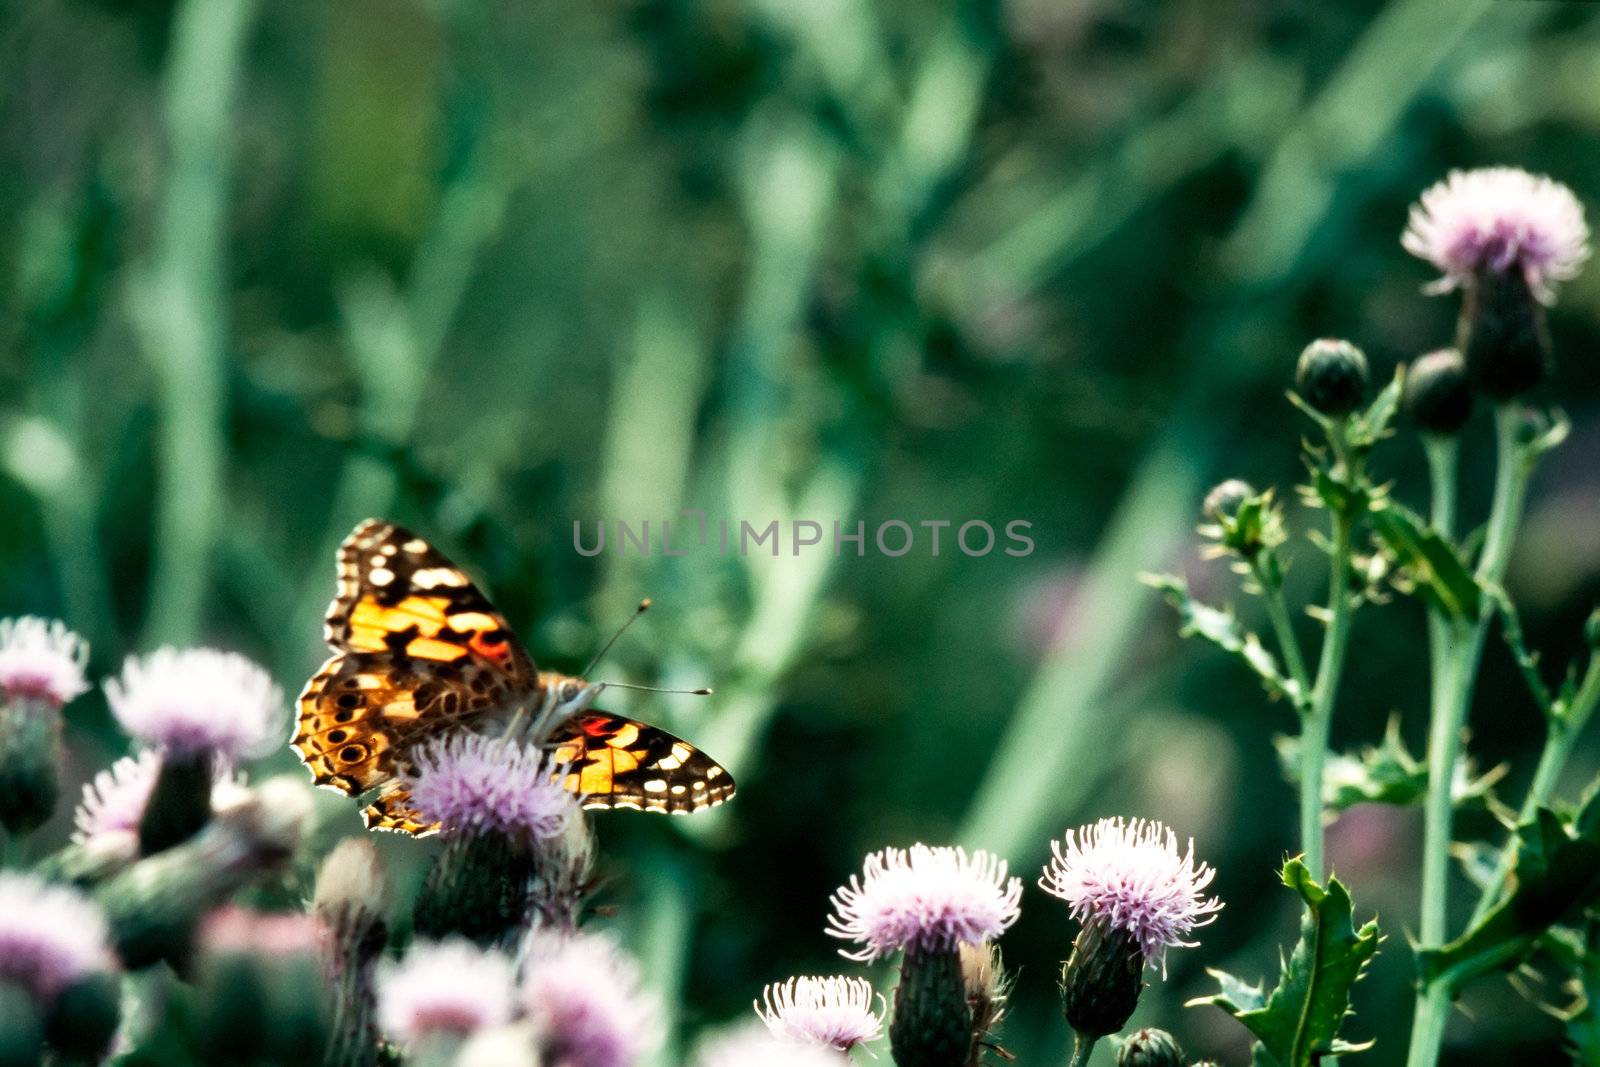 Painted Lady, Vanessa cardui, butterfly on flowering thistles by PiLens